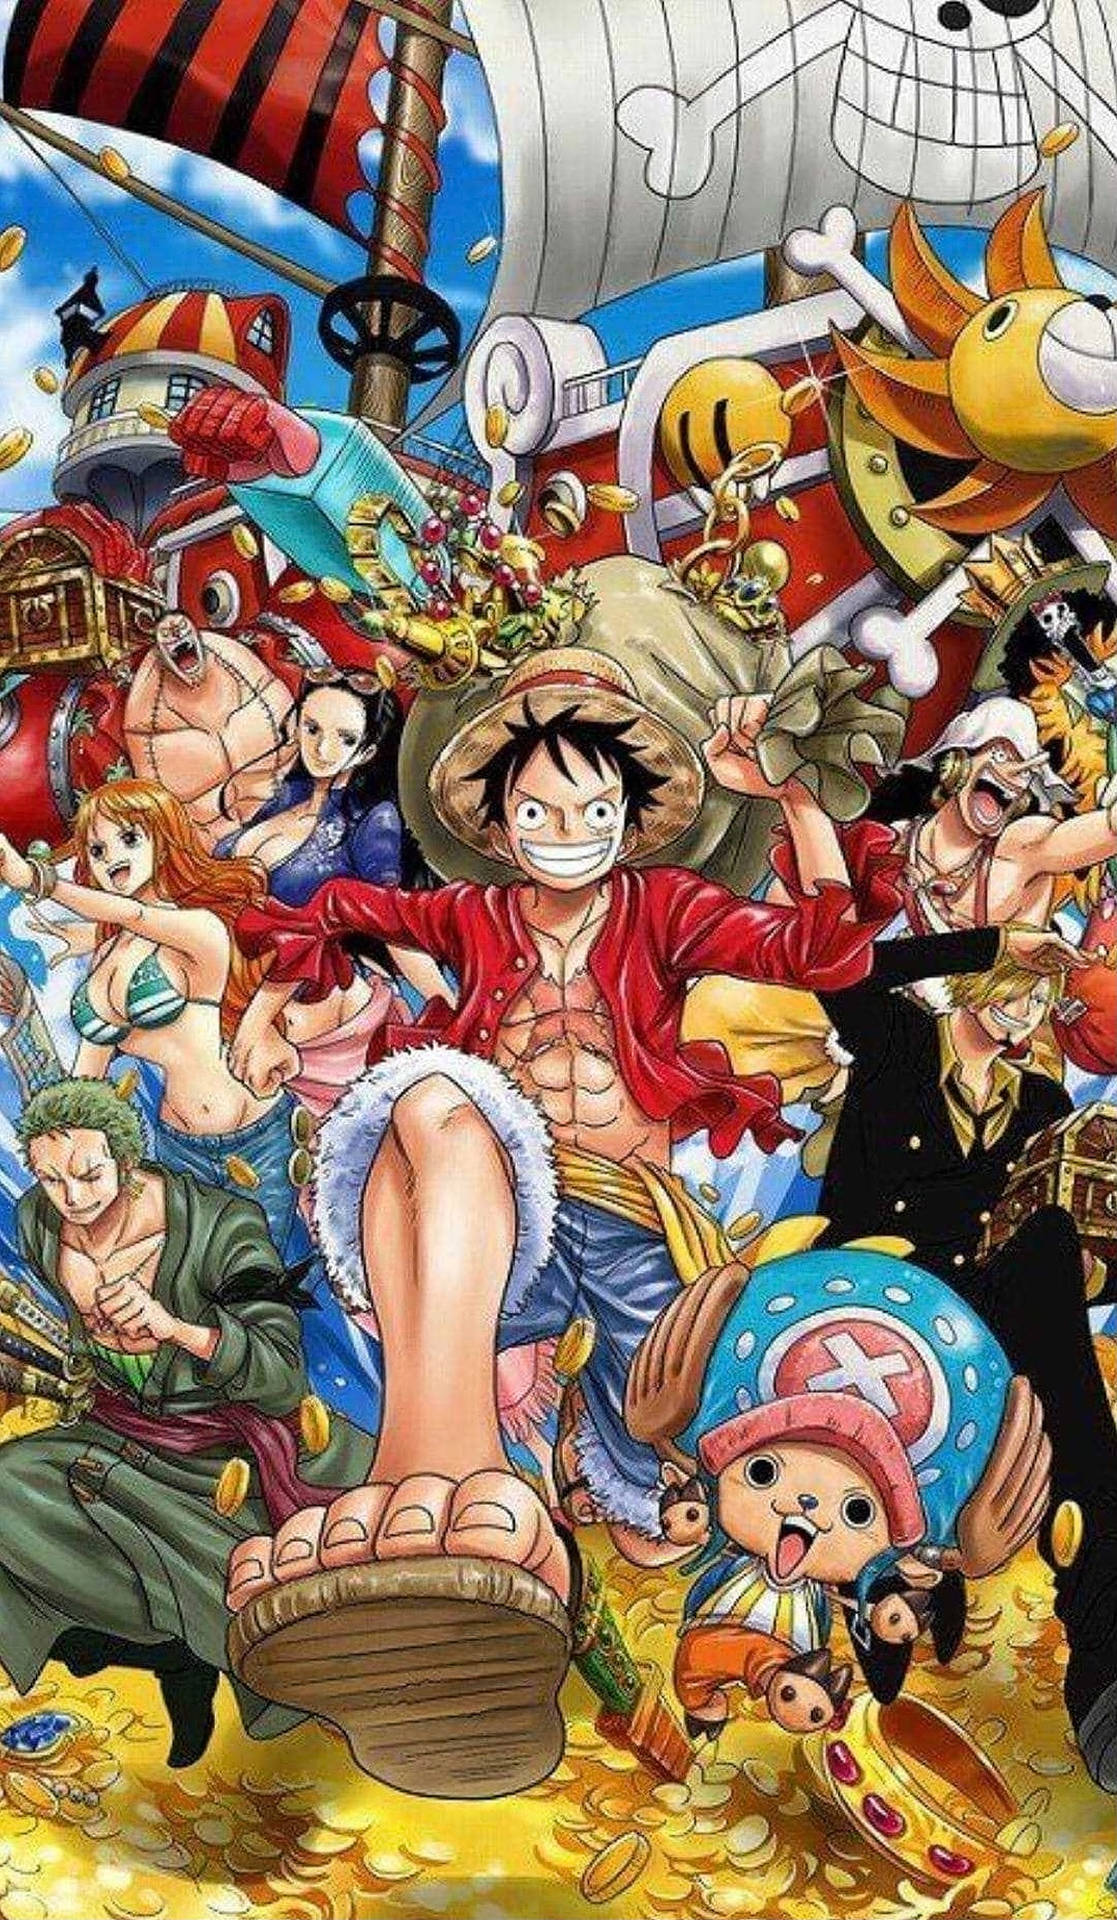 Aggregate 81+ anime wallpaper one piece best